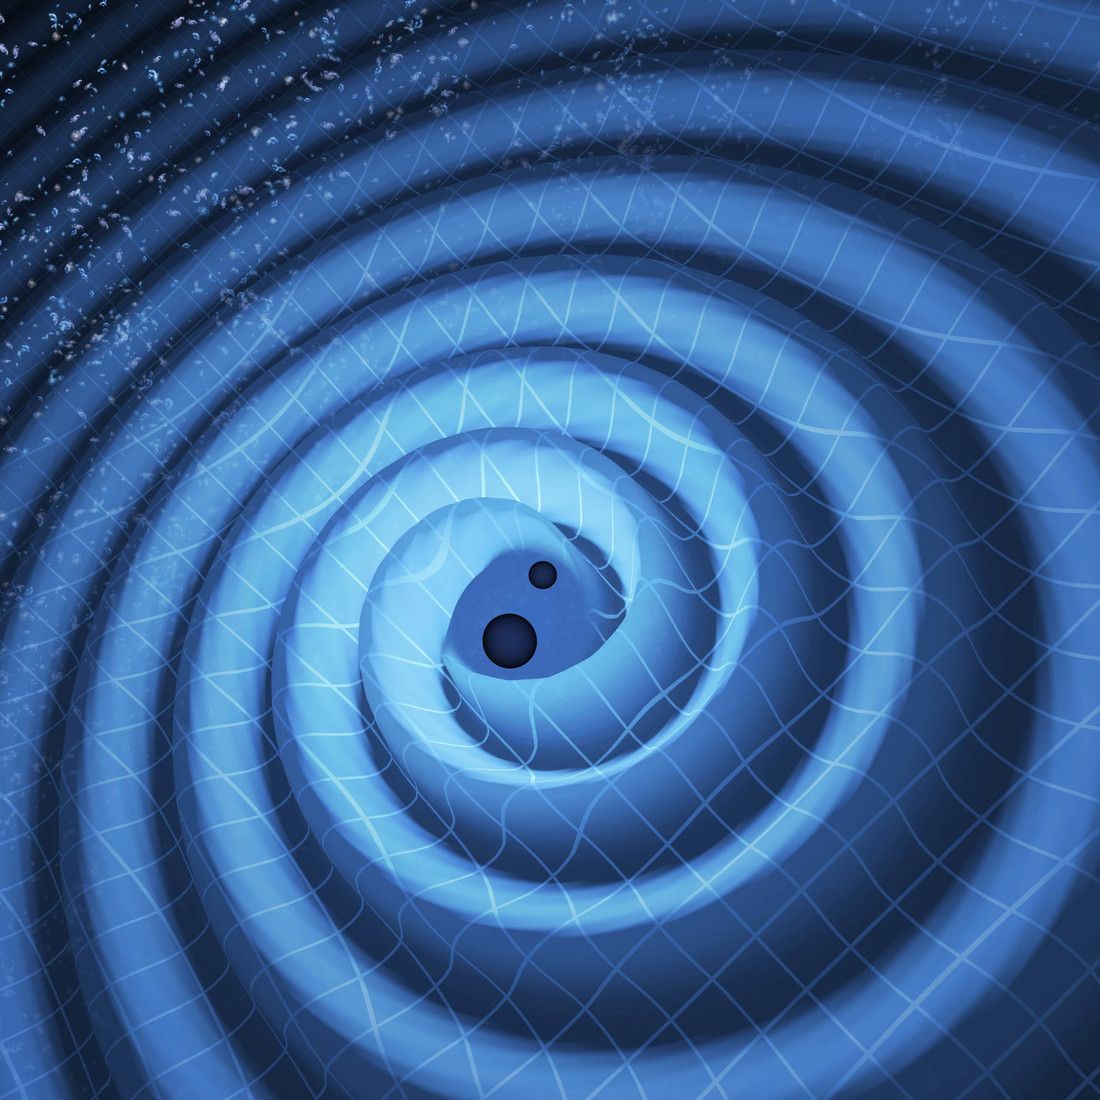 The black holes were 14 and 8 times the mass of the sun. As they spiraled together, they sent out gravitational waves.